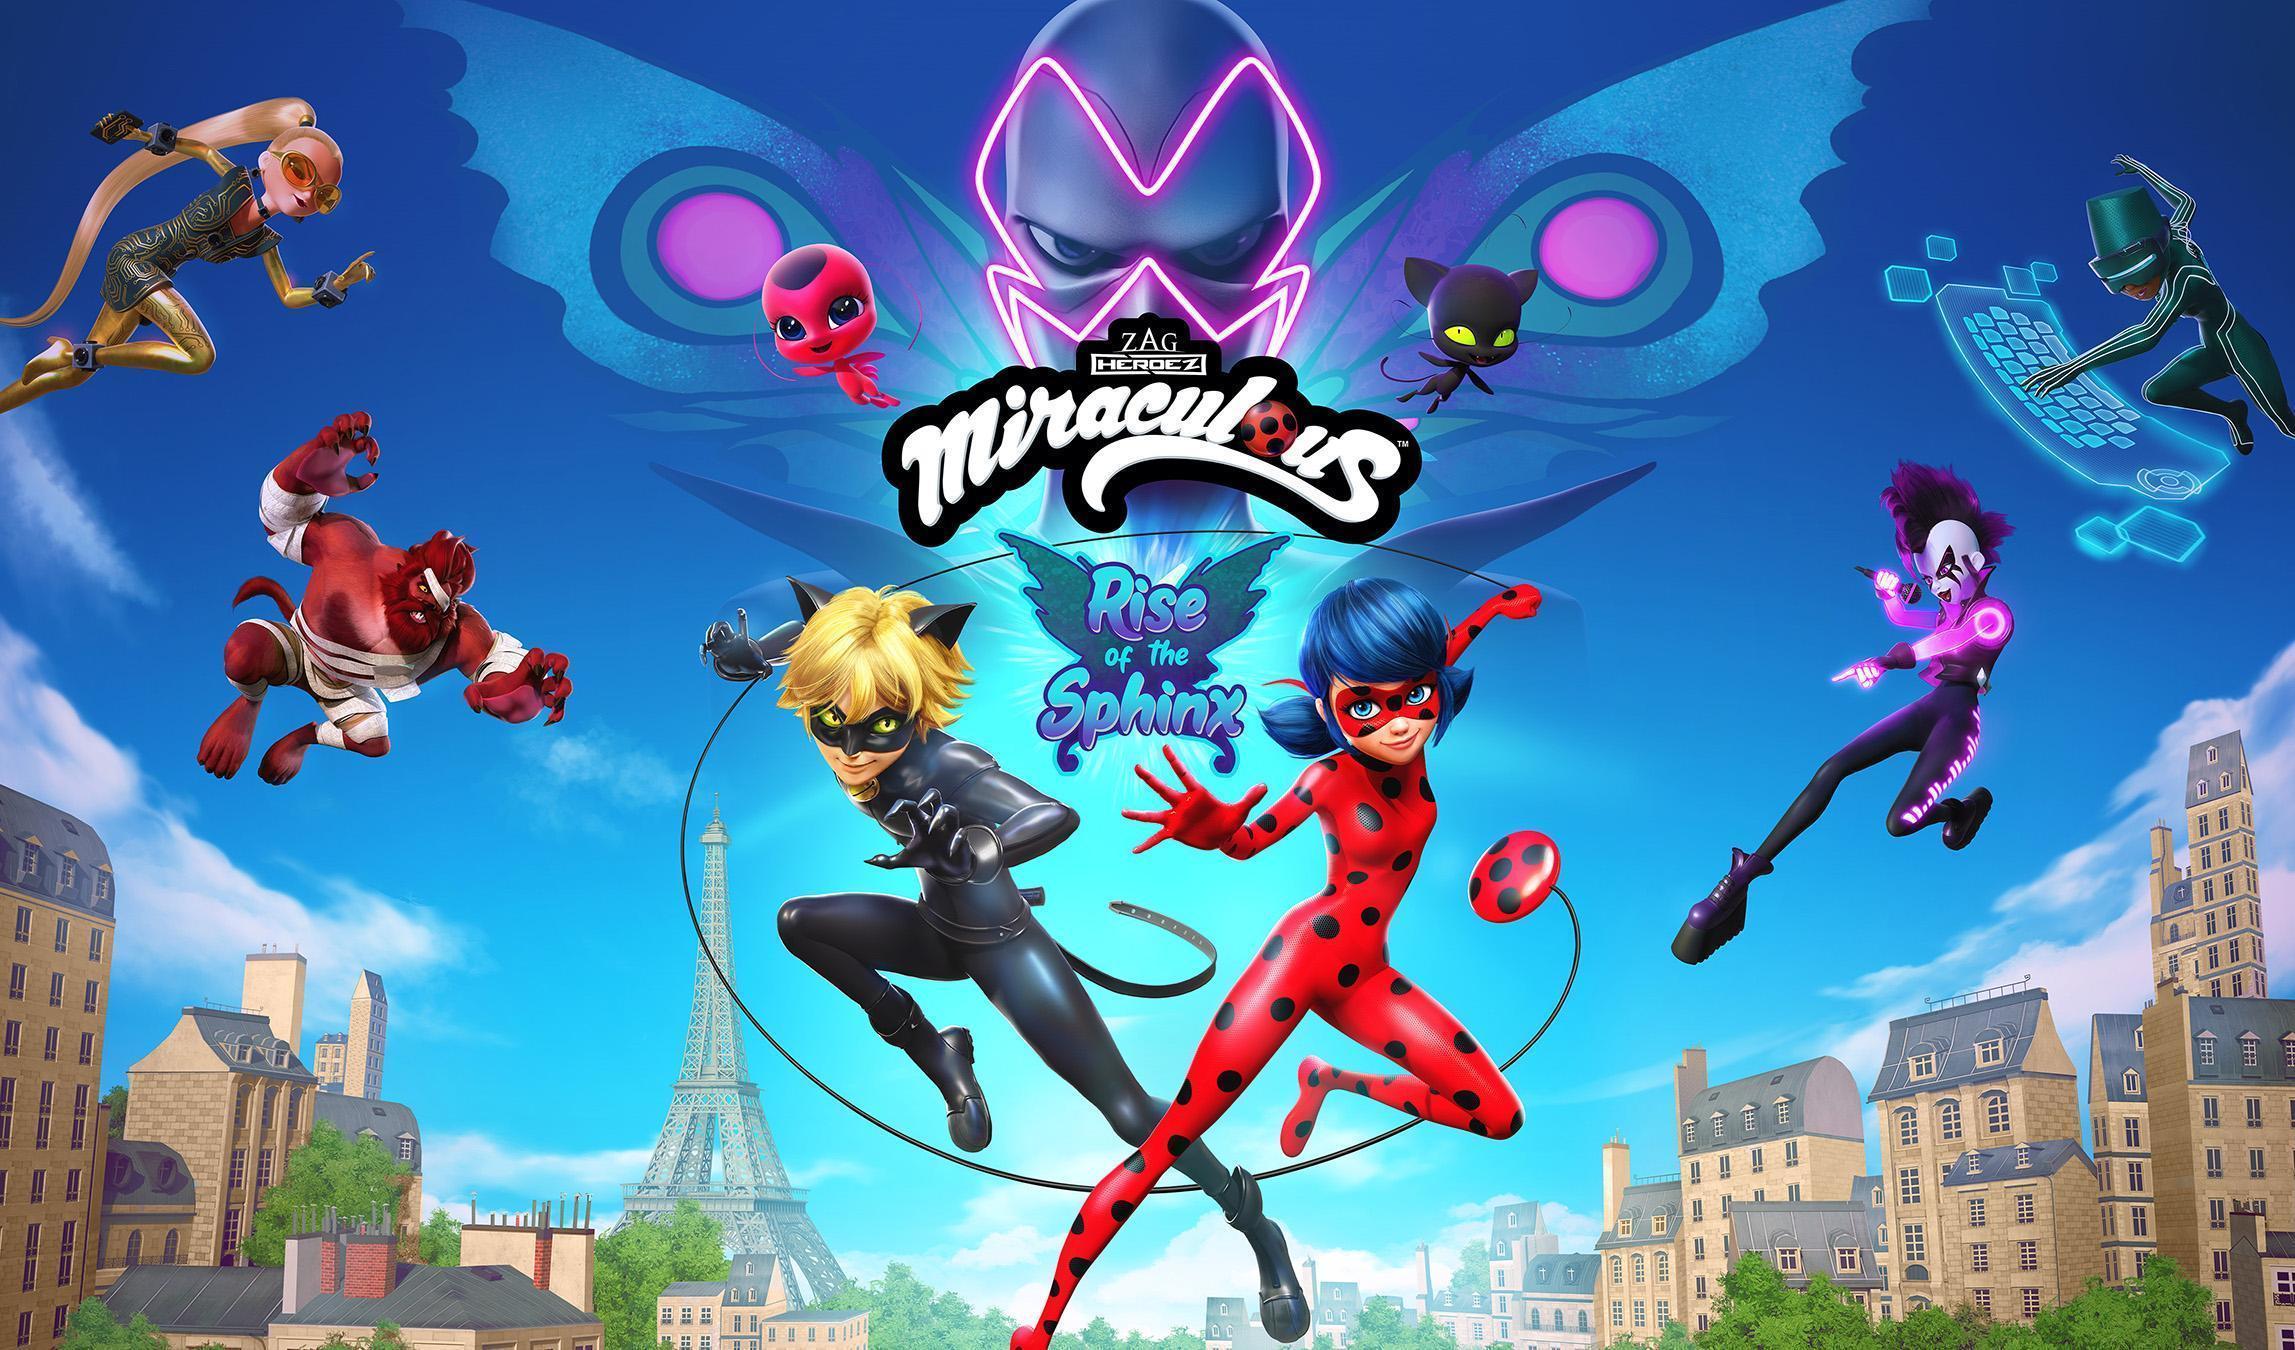 ZAG’s Miraculous: Rise of the Sphinx chega hoje nos PC e Consoles